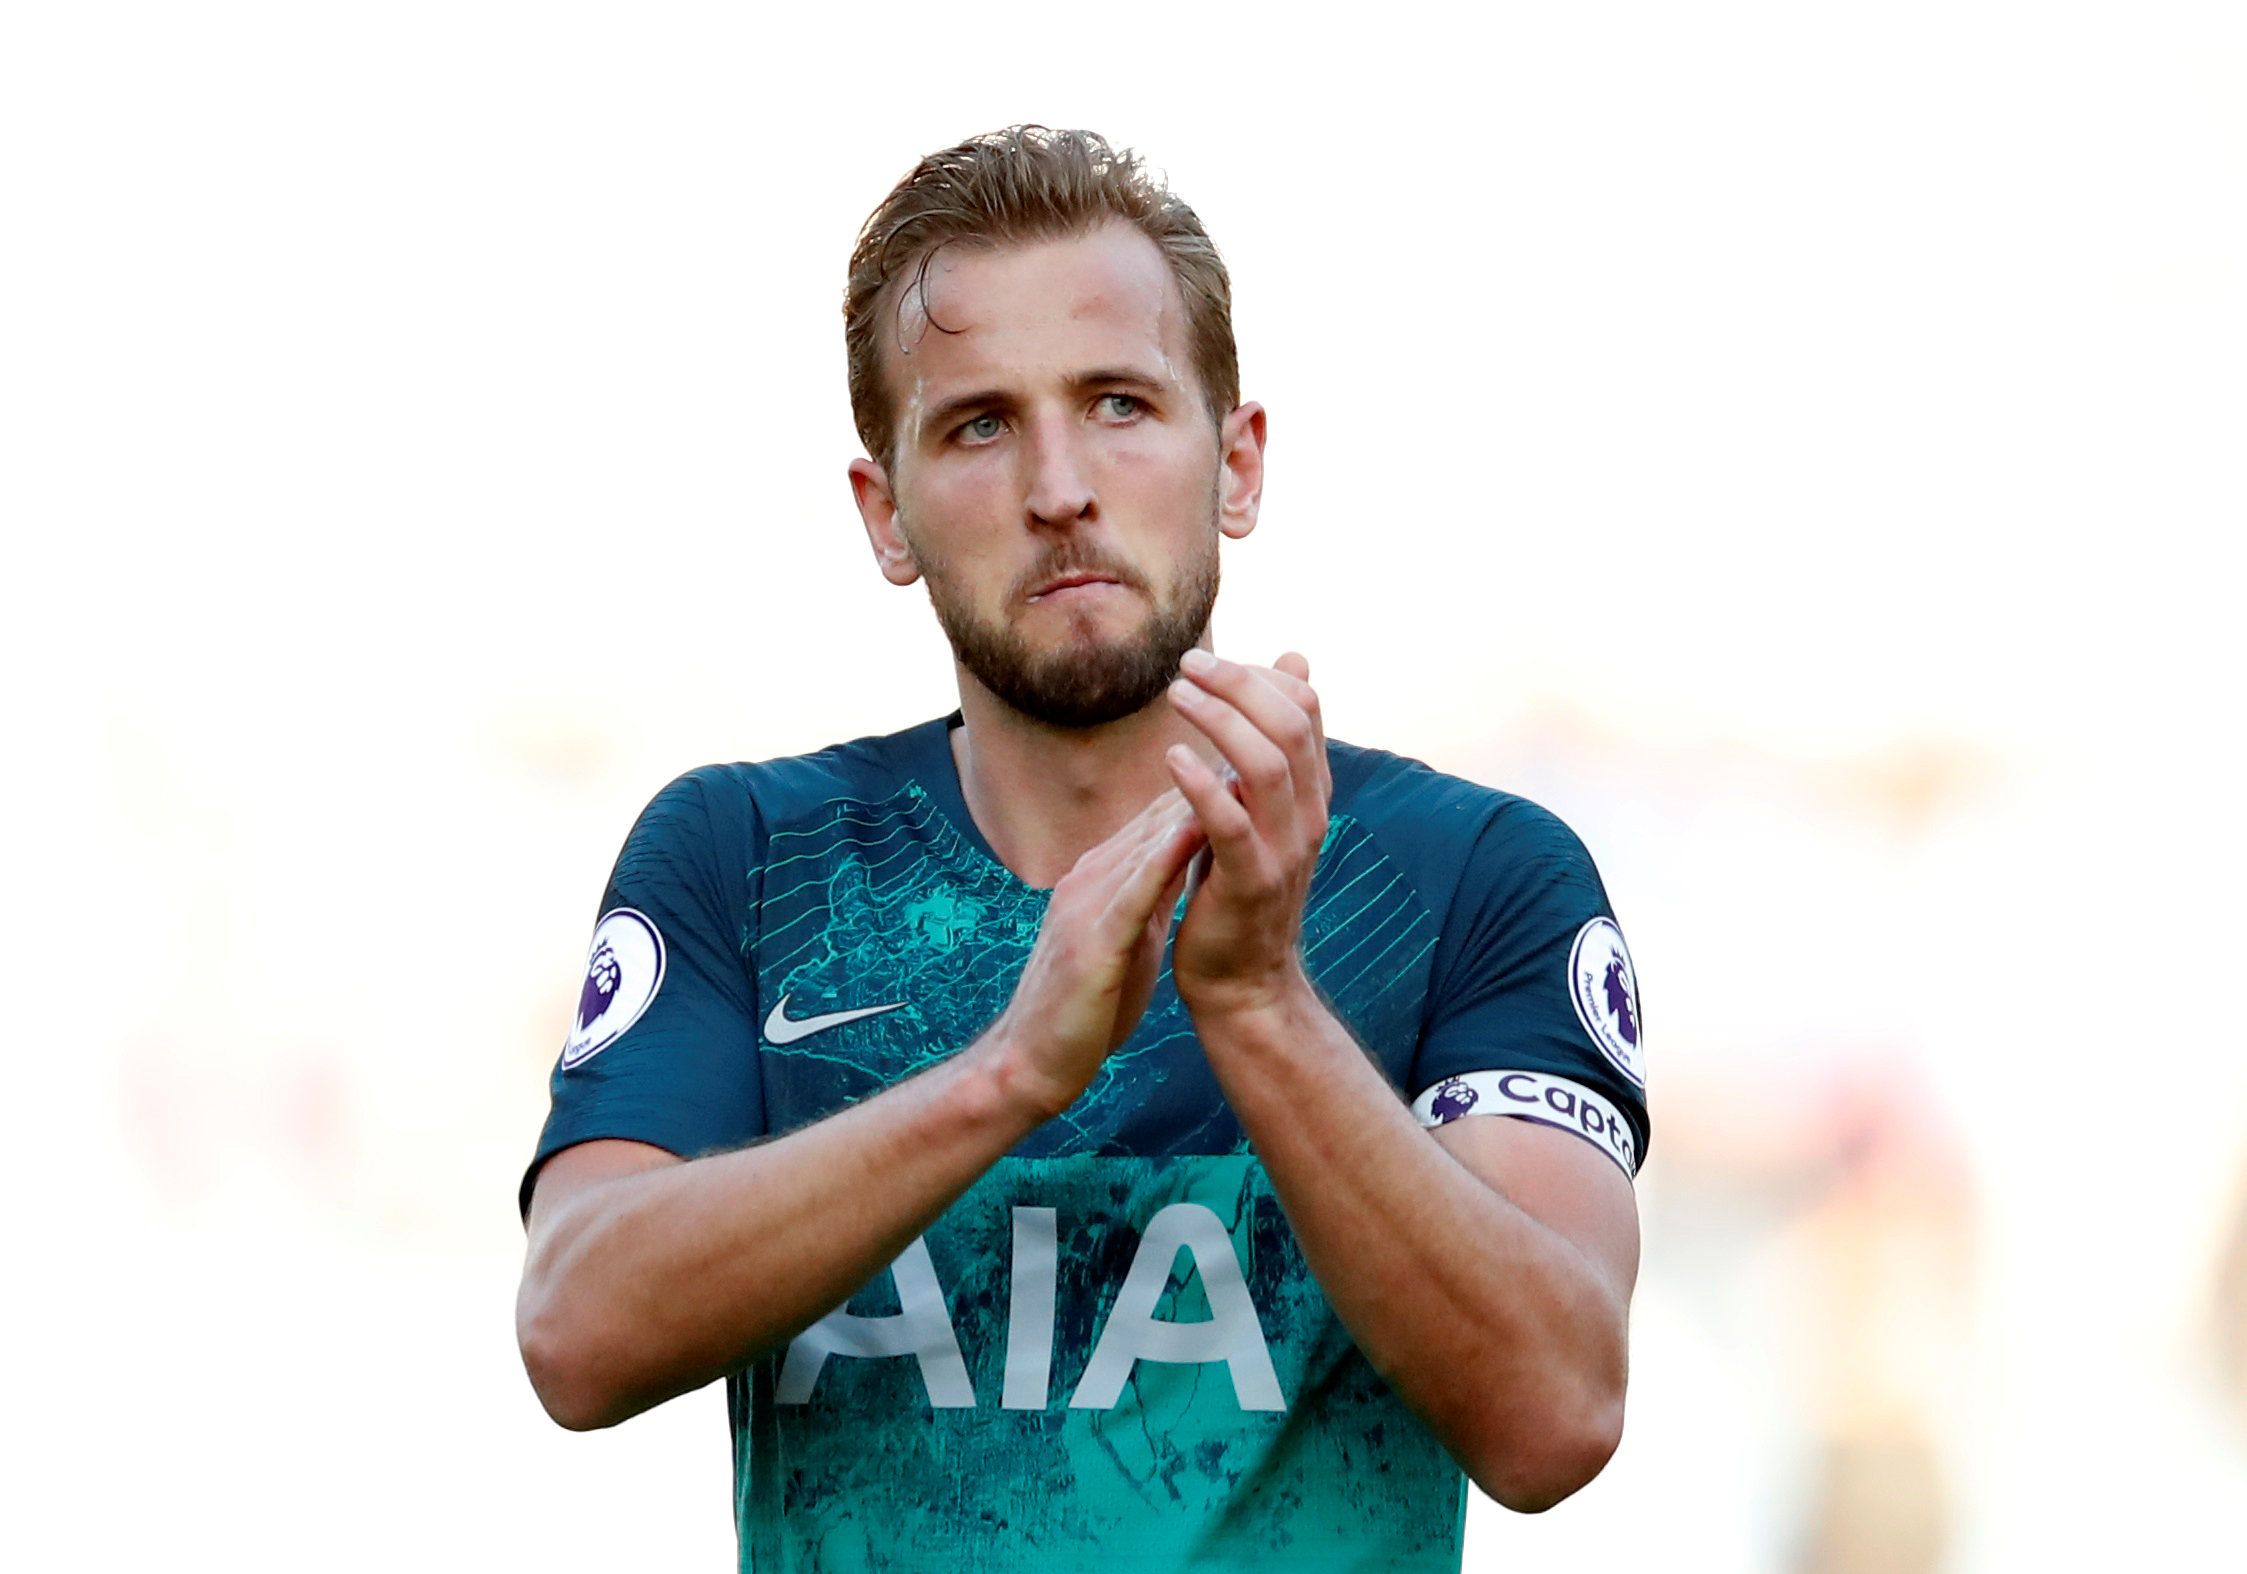 Soccer Football - Premier League - Huddersfield Town v Tottenham Hotspur - John Smith's Stadium, Huddersfield, Britain - September 29, 2018  Tottenham's Harry Kane celebrates after the match   Action Images via Reuters/Andrew Boyers  EDITORIAL USE ONLY. No use with unauthorized audio, video, data, fixture lists, club/league logos or "live" services. Online in-match use limited to 75 images, no video emulation. No use in betting, games or single club/league/player publications.  Please contact yo